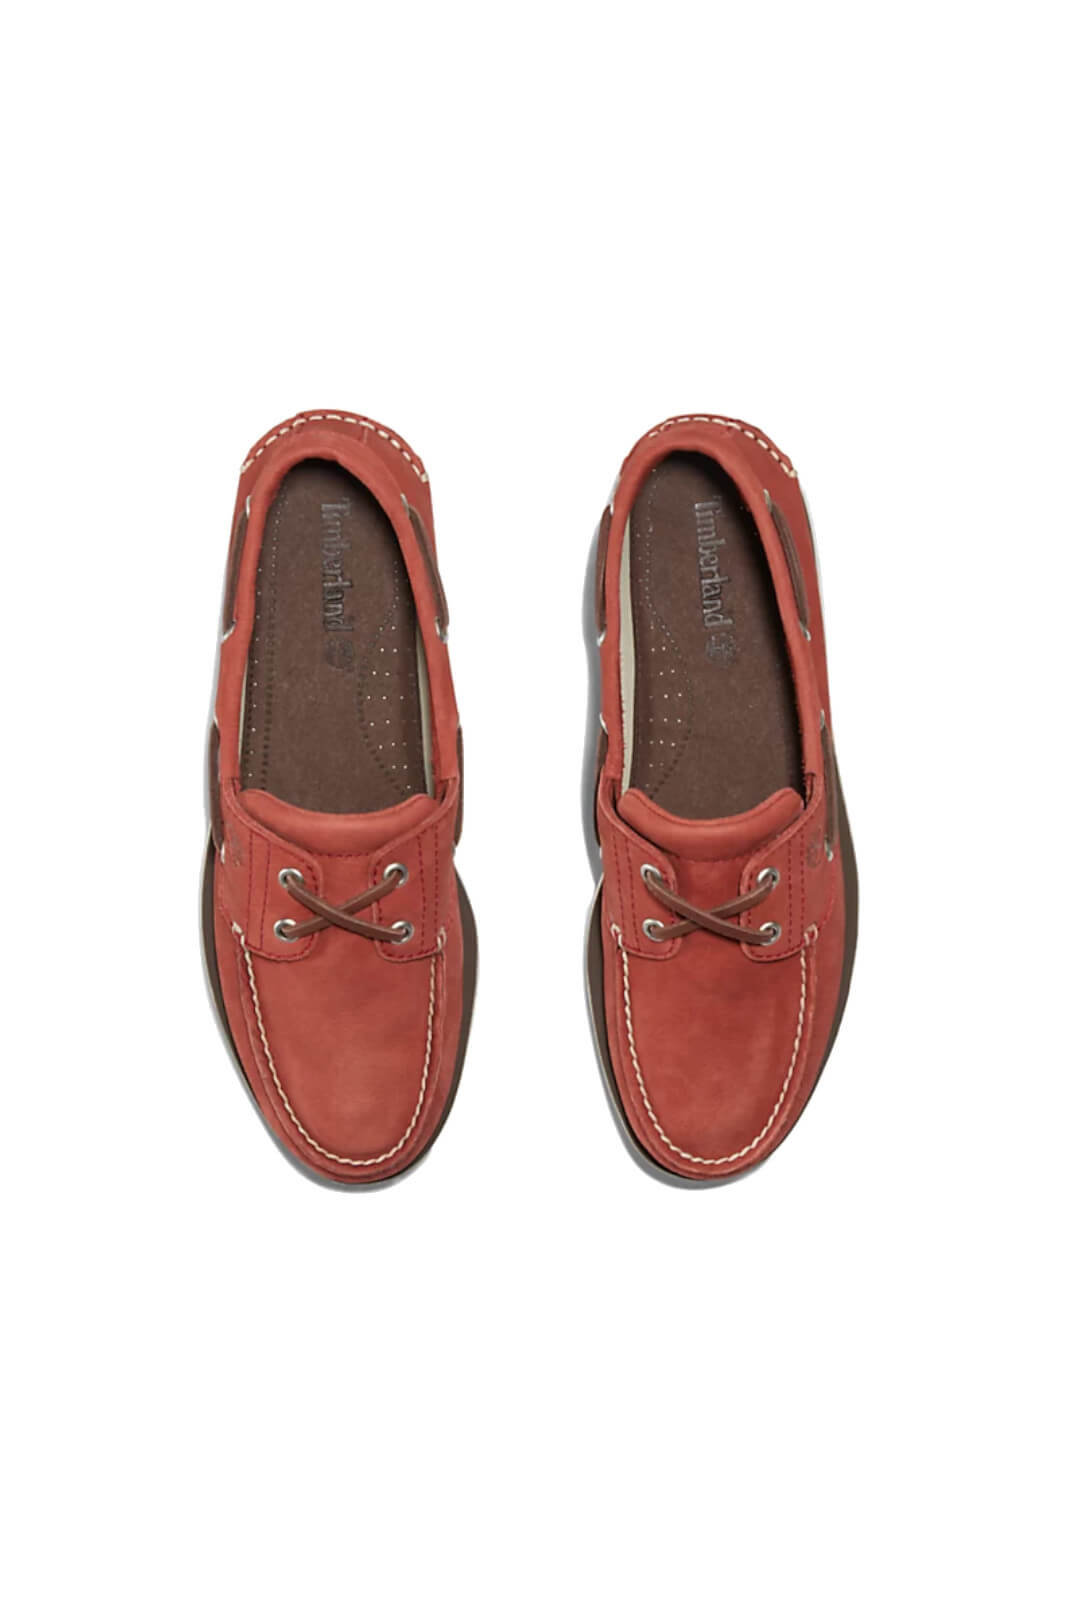 Timberland CLASSIC BOAT men's boat shoes